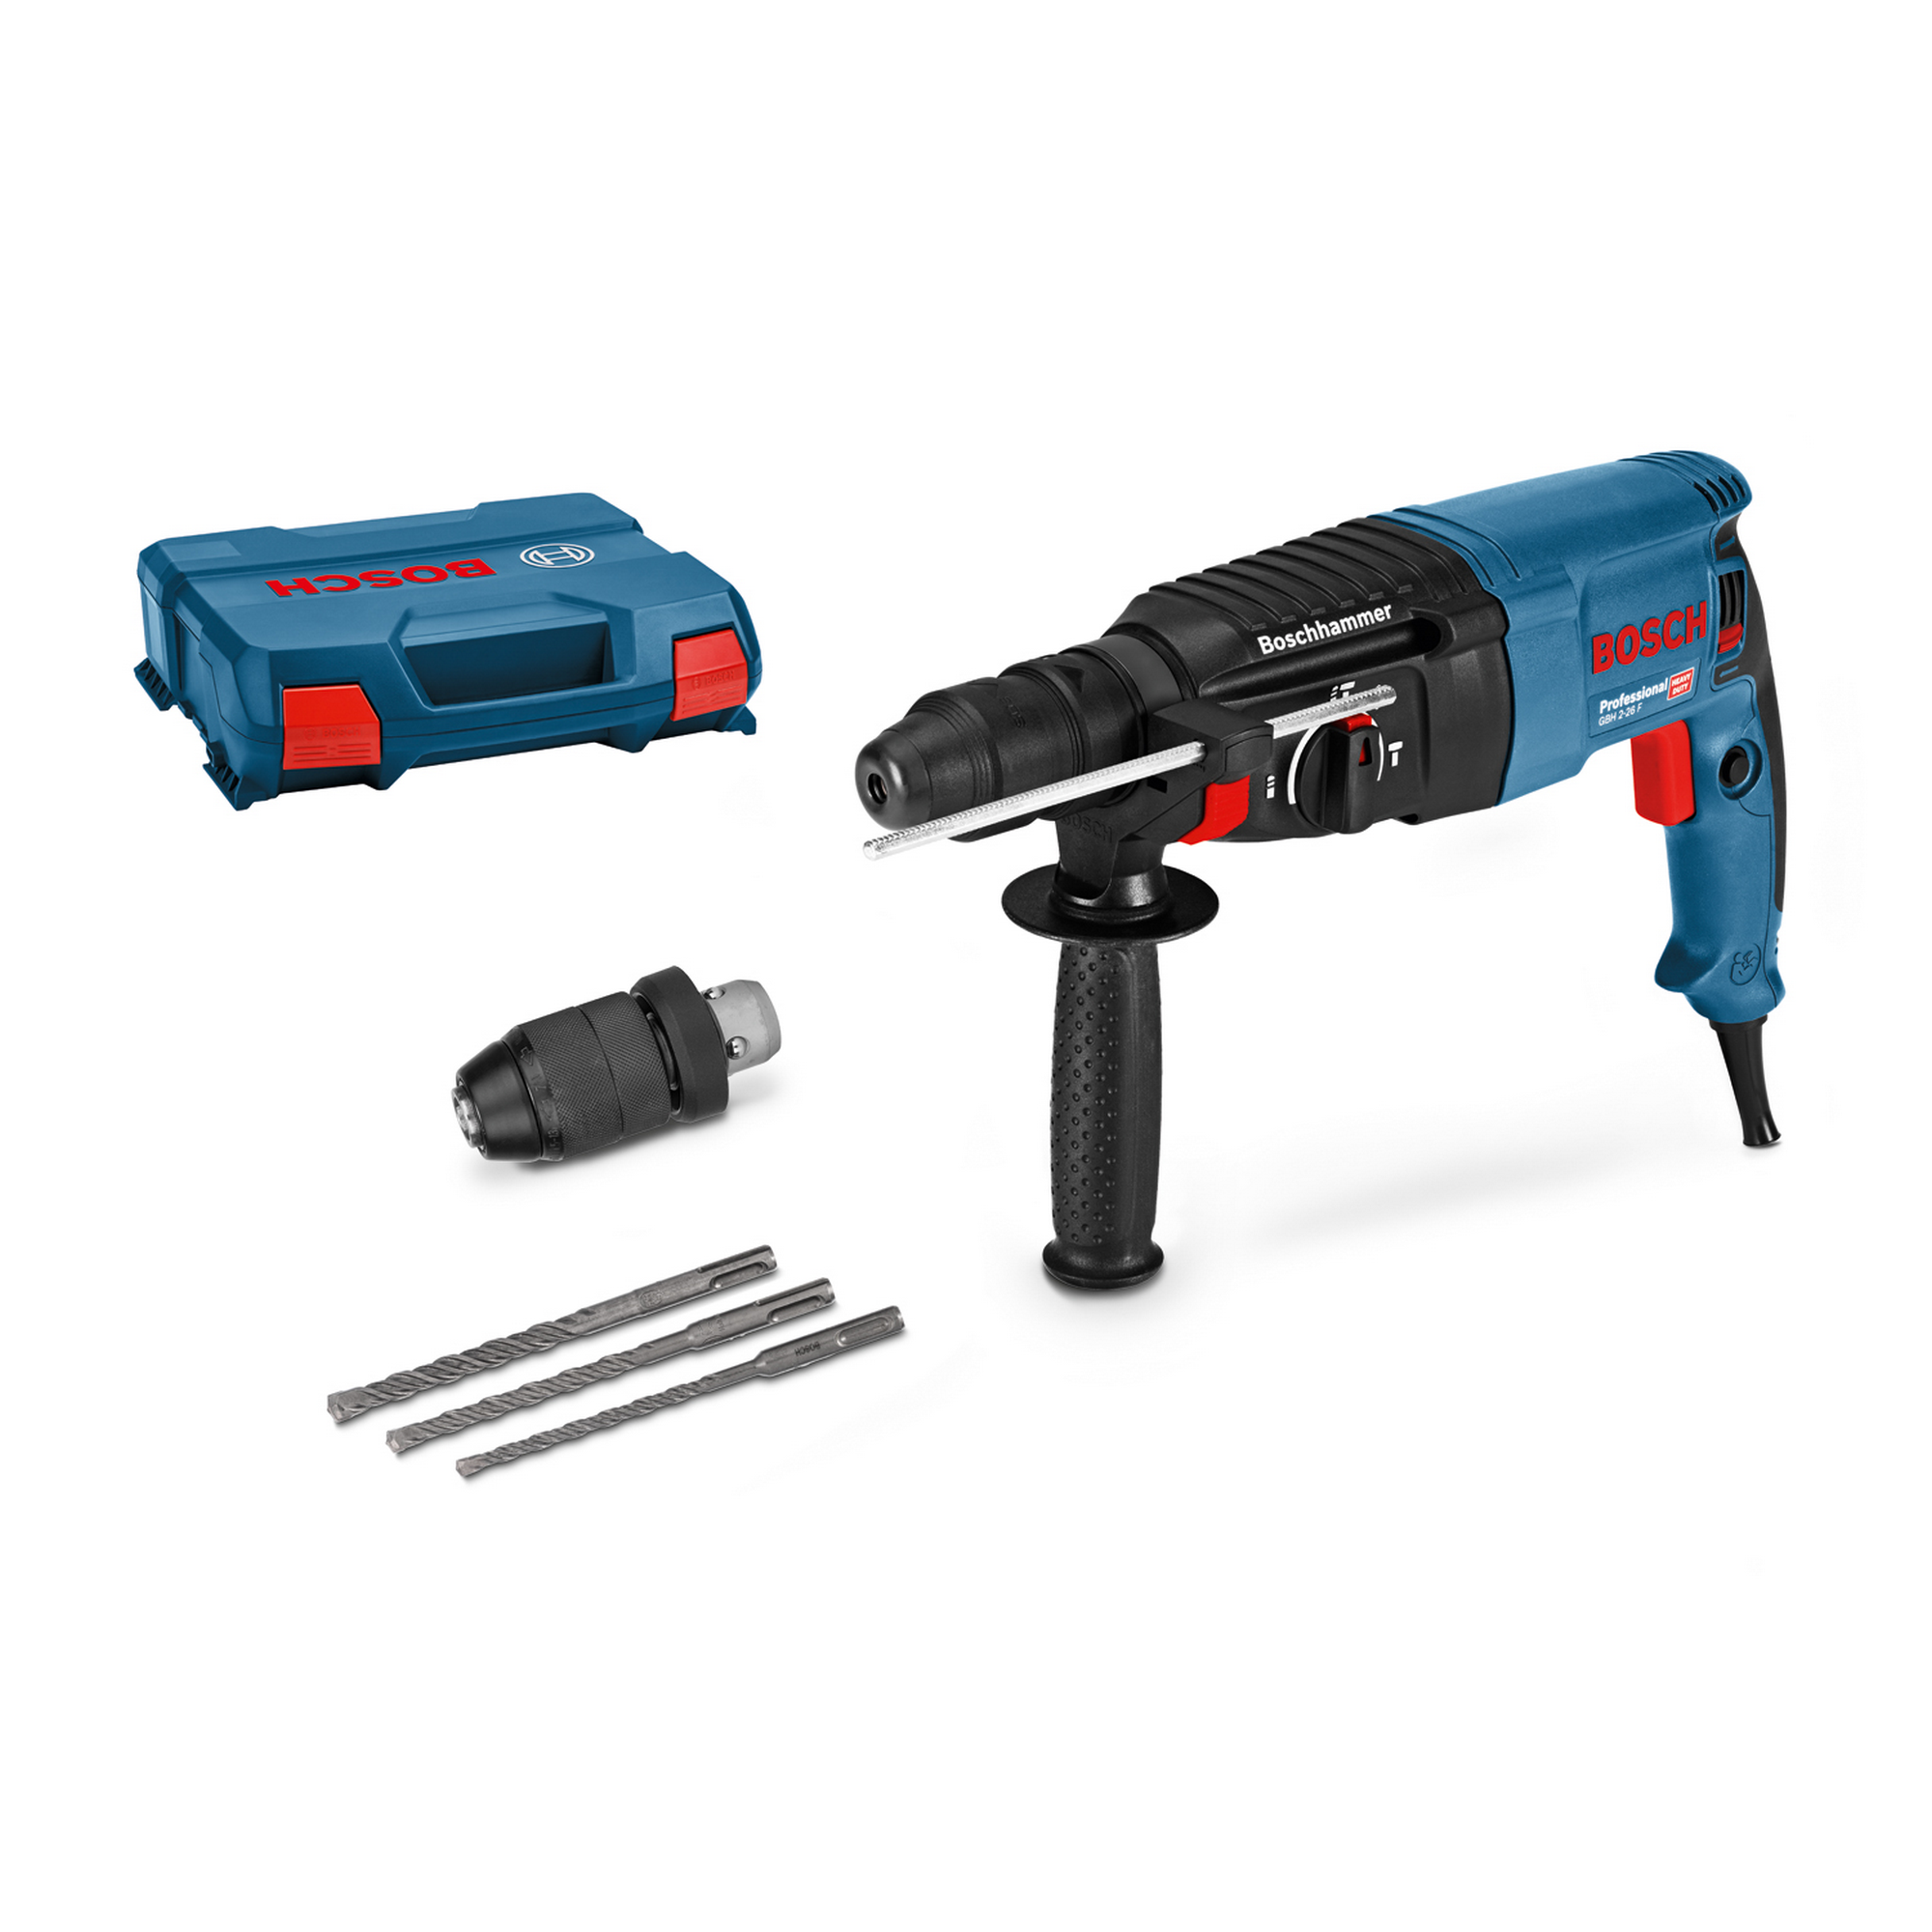 Bohrhammer 'GBH 2-26 F Professional' mit SDS plus, in Koffer + product video